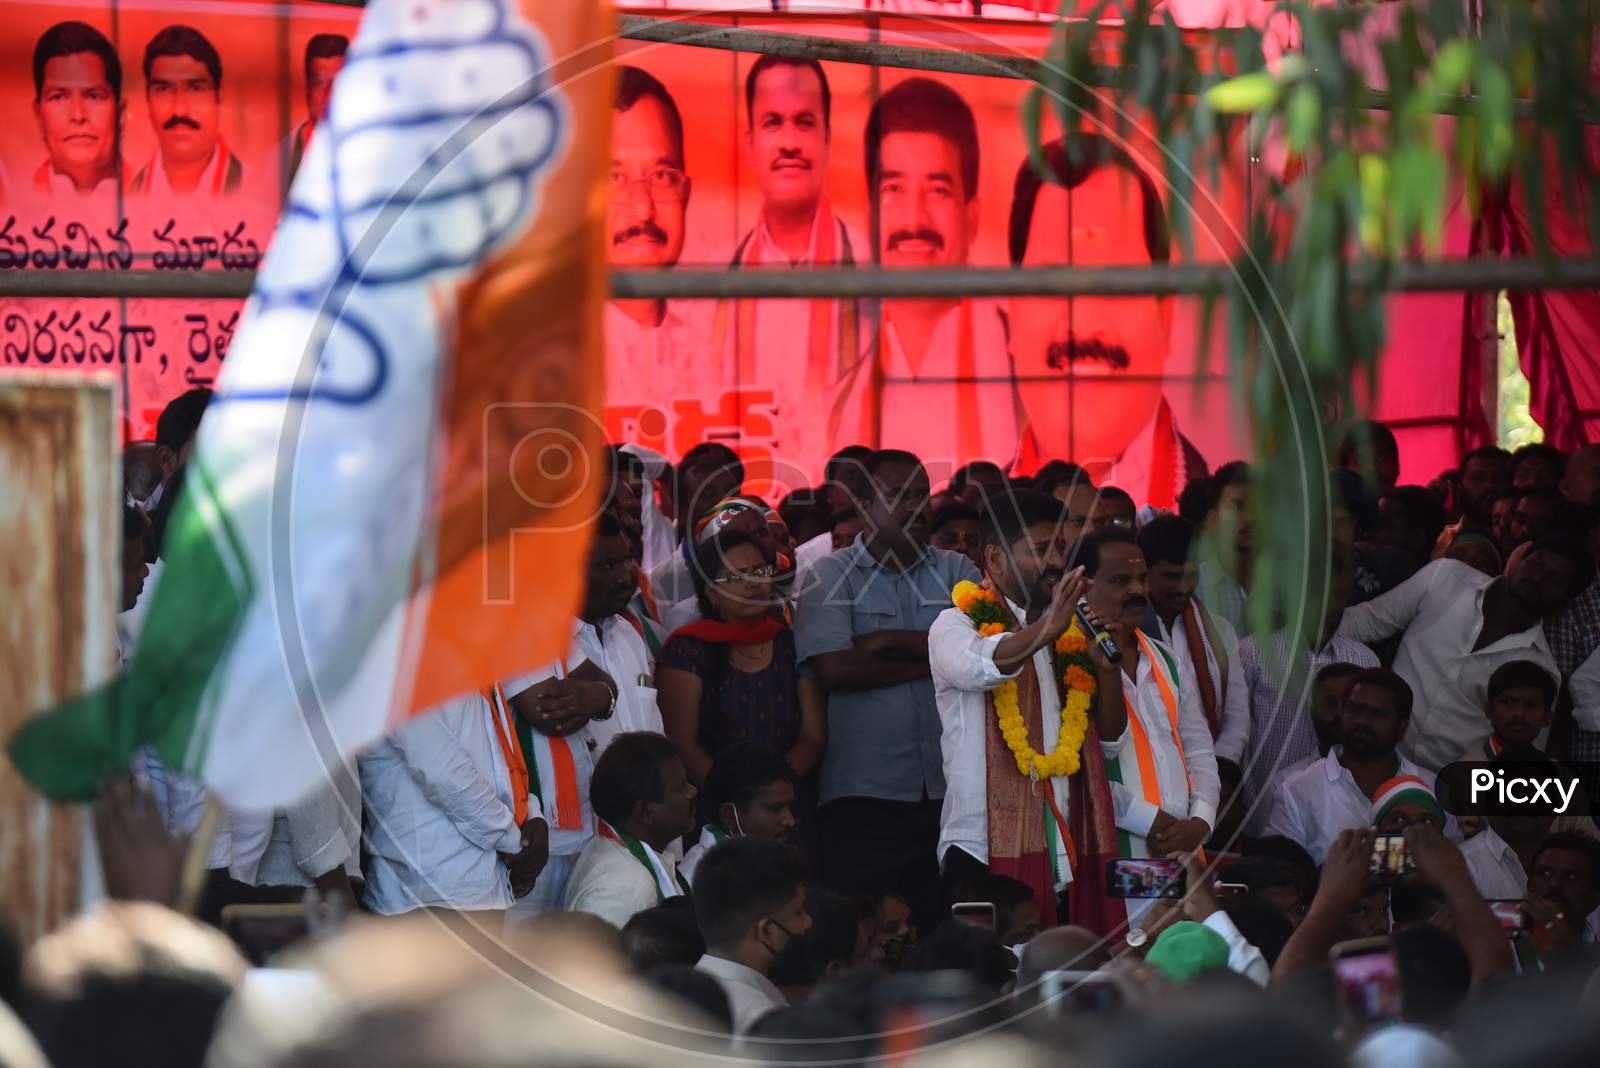 Revanth Reddy Anumula, INC leader and Malkajgiri MP addressing people in a protest at Shadnagar against Central Government's New Farm Laws in solidarity with Farmers agitating at Delhi Borders, December 8, 2020.